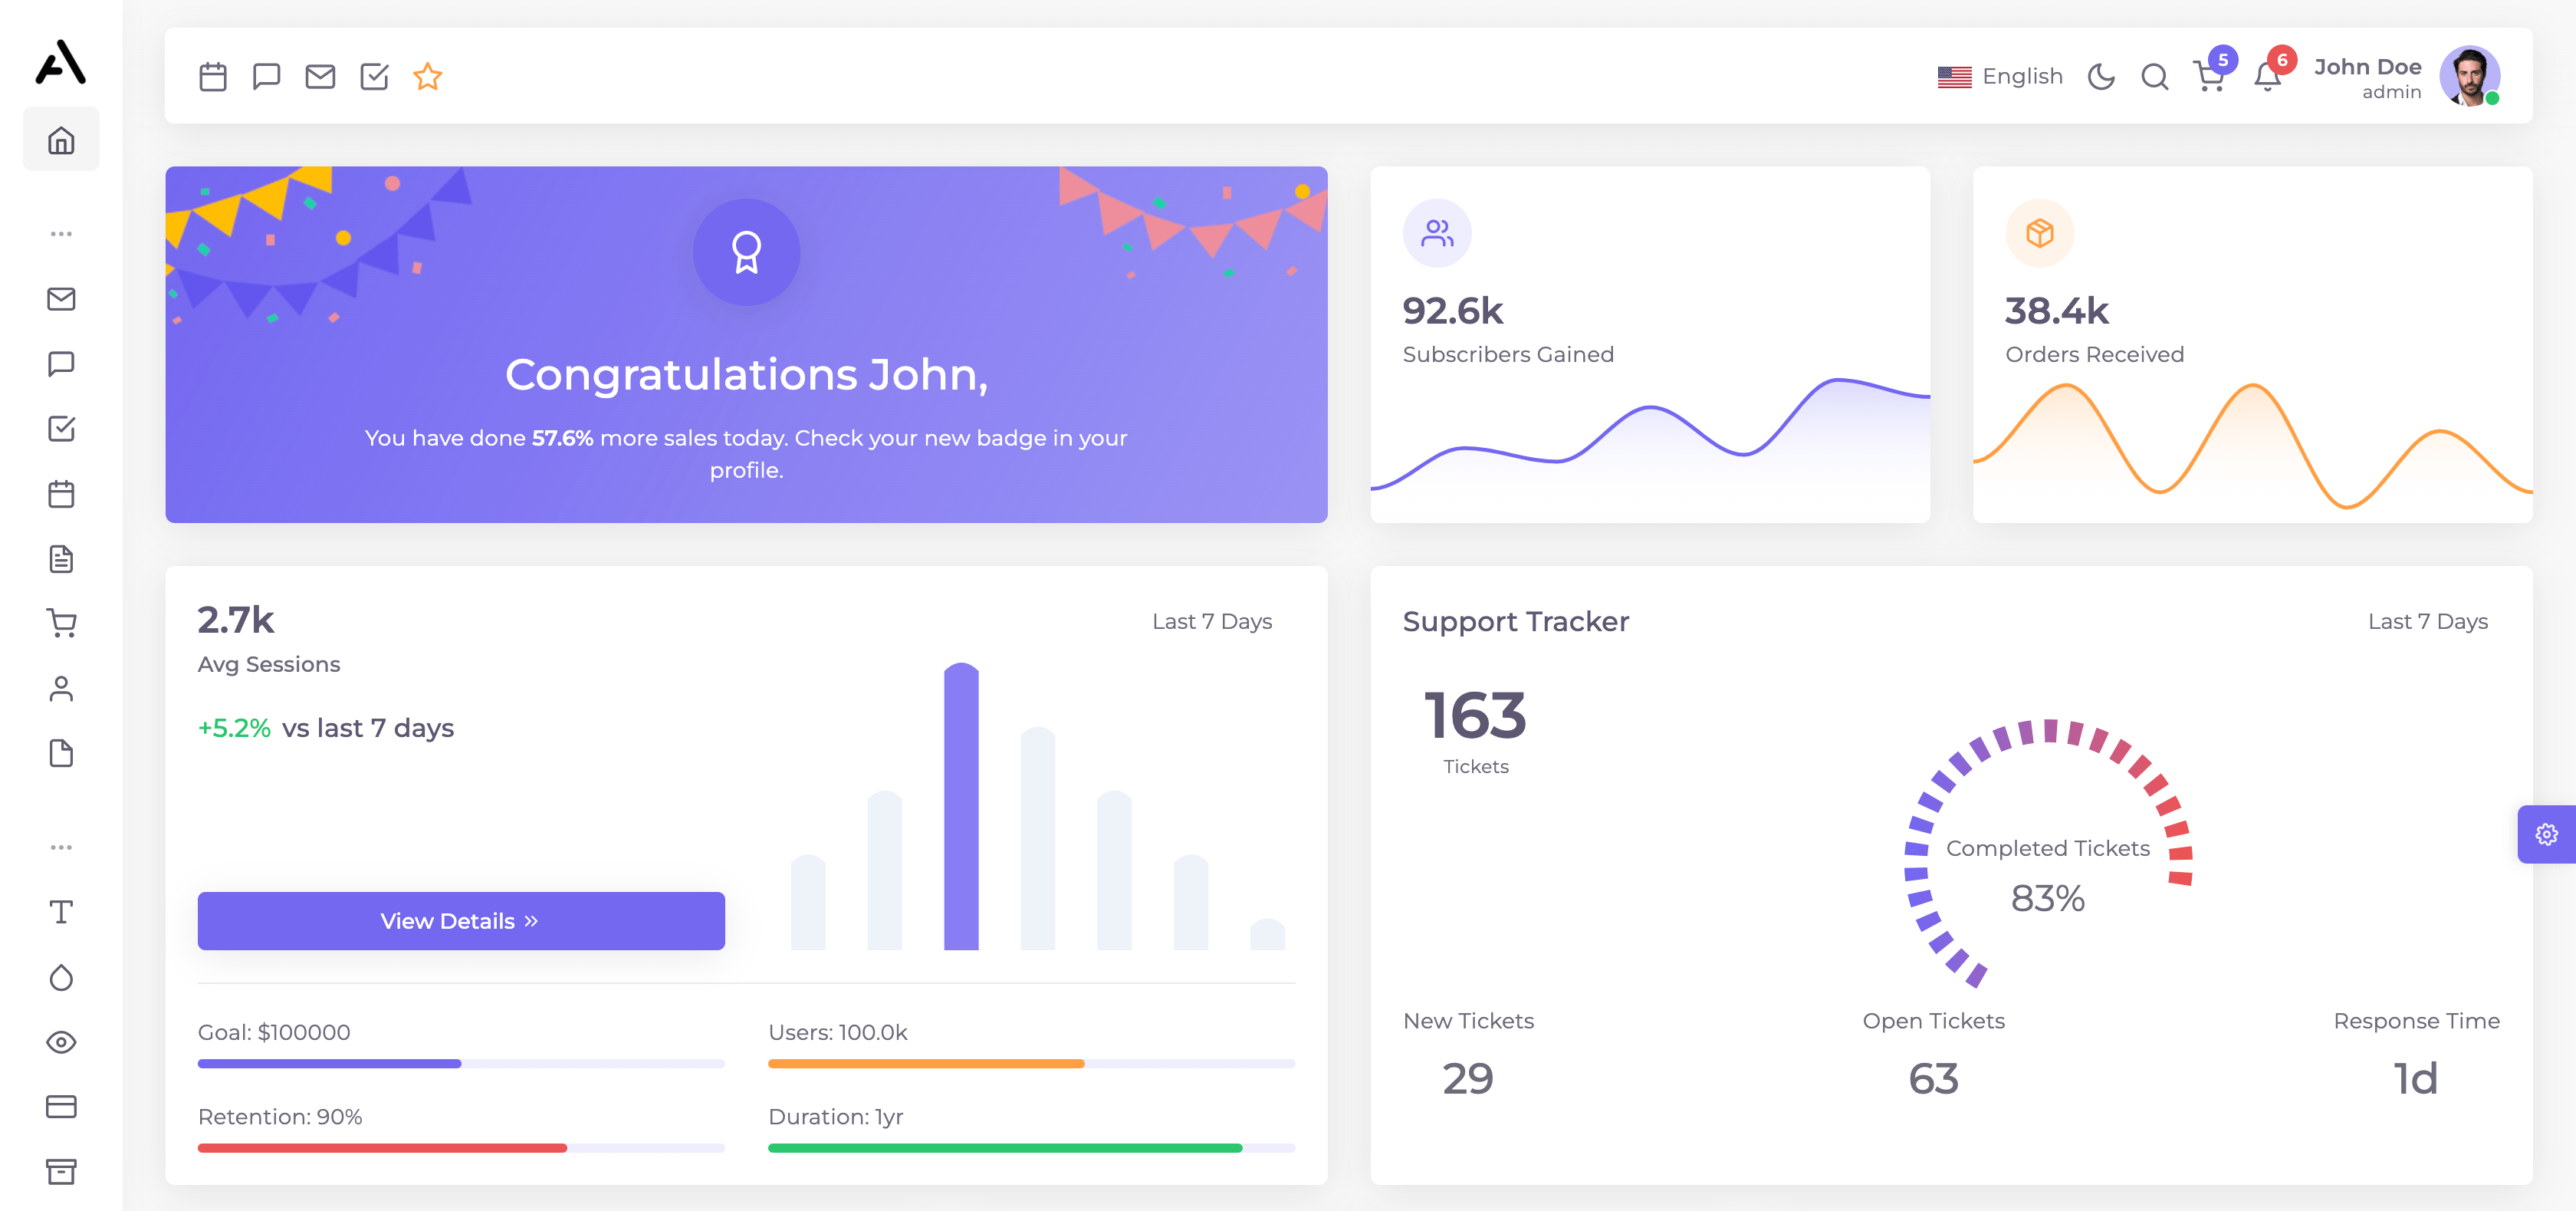 A dashboard showing user acquisition and app insights through data analytics